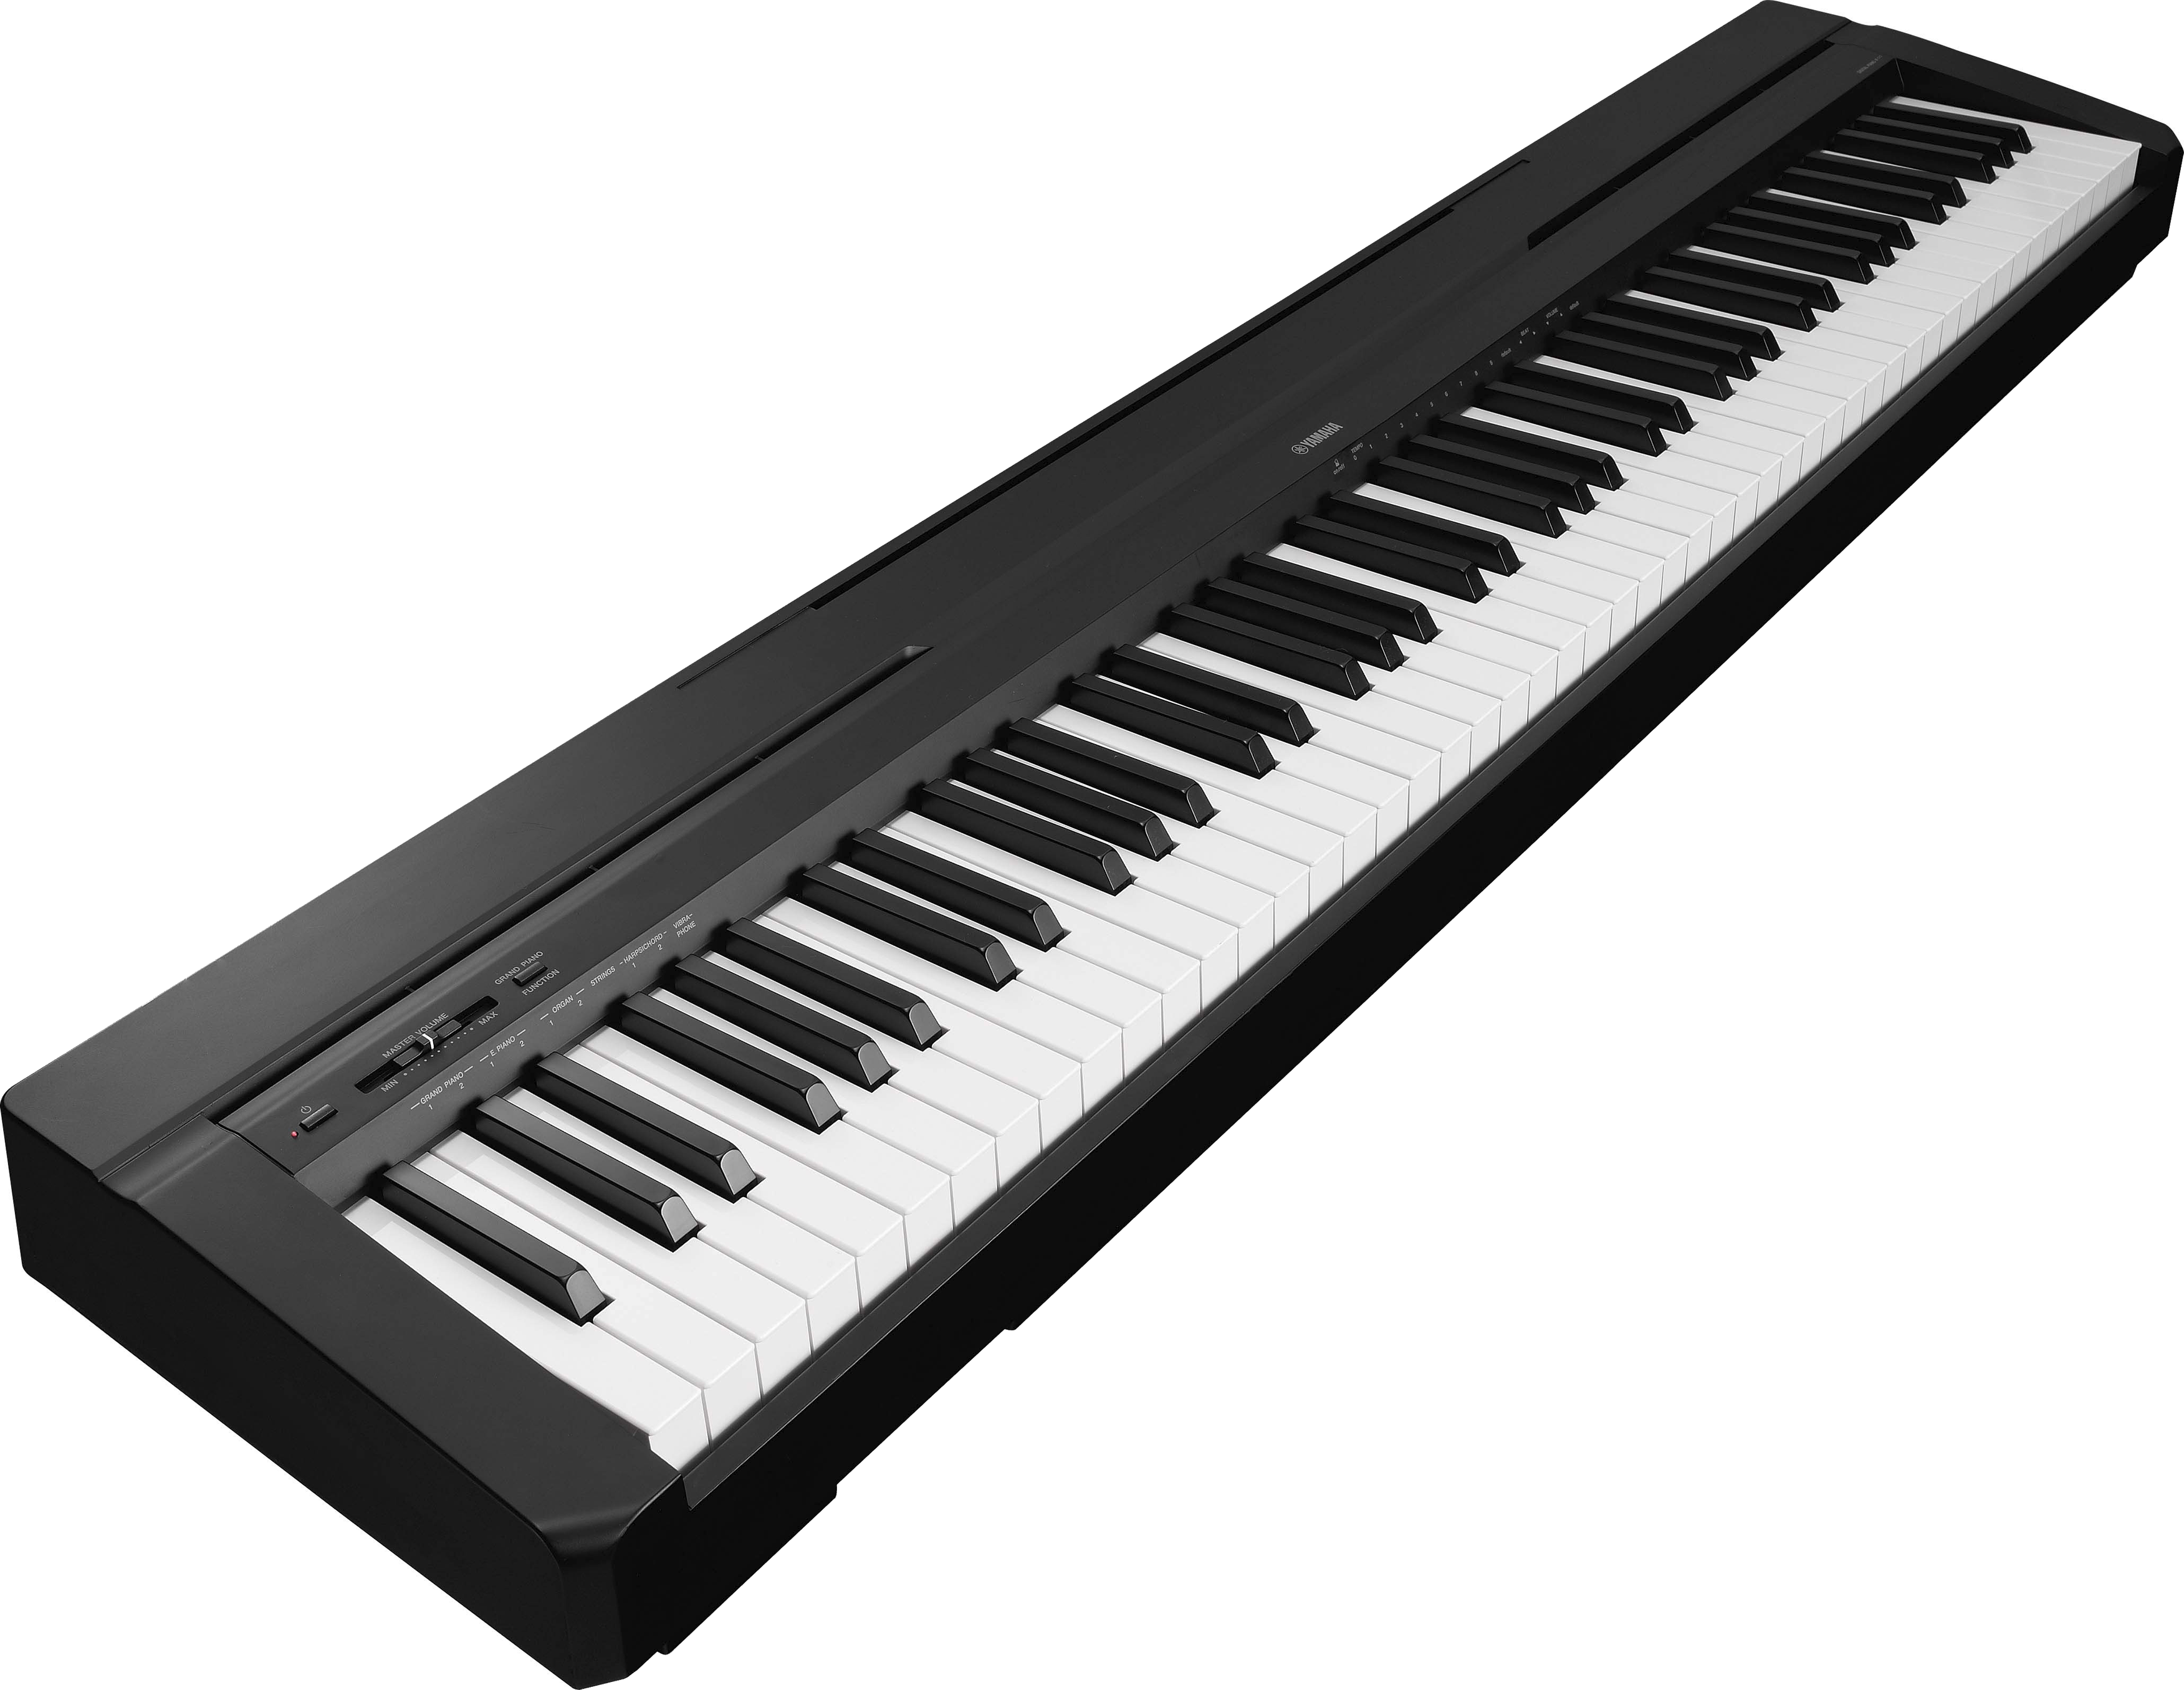 Piano Png Picture PNG Image